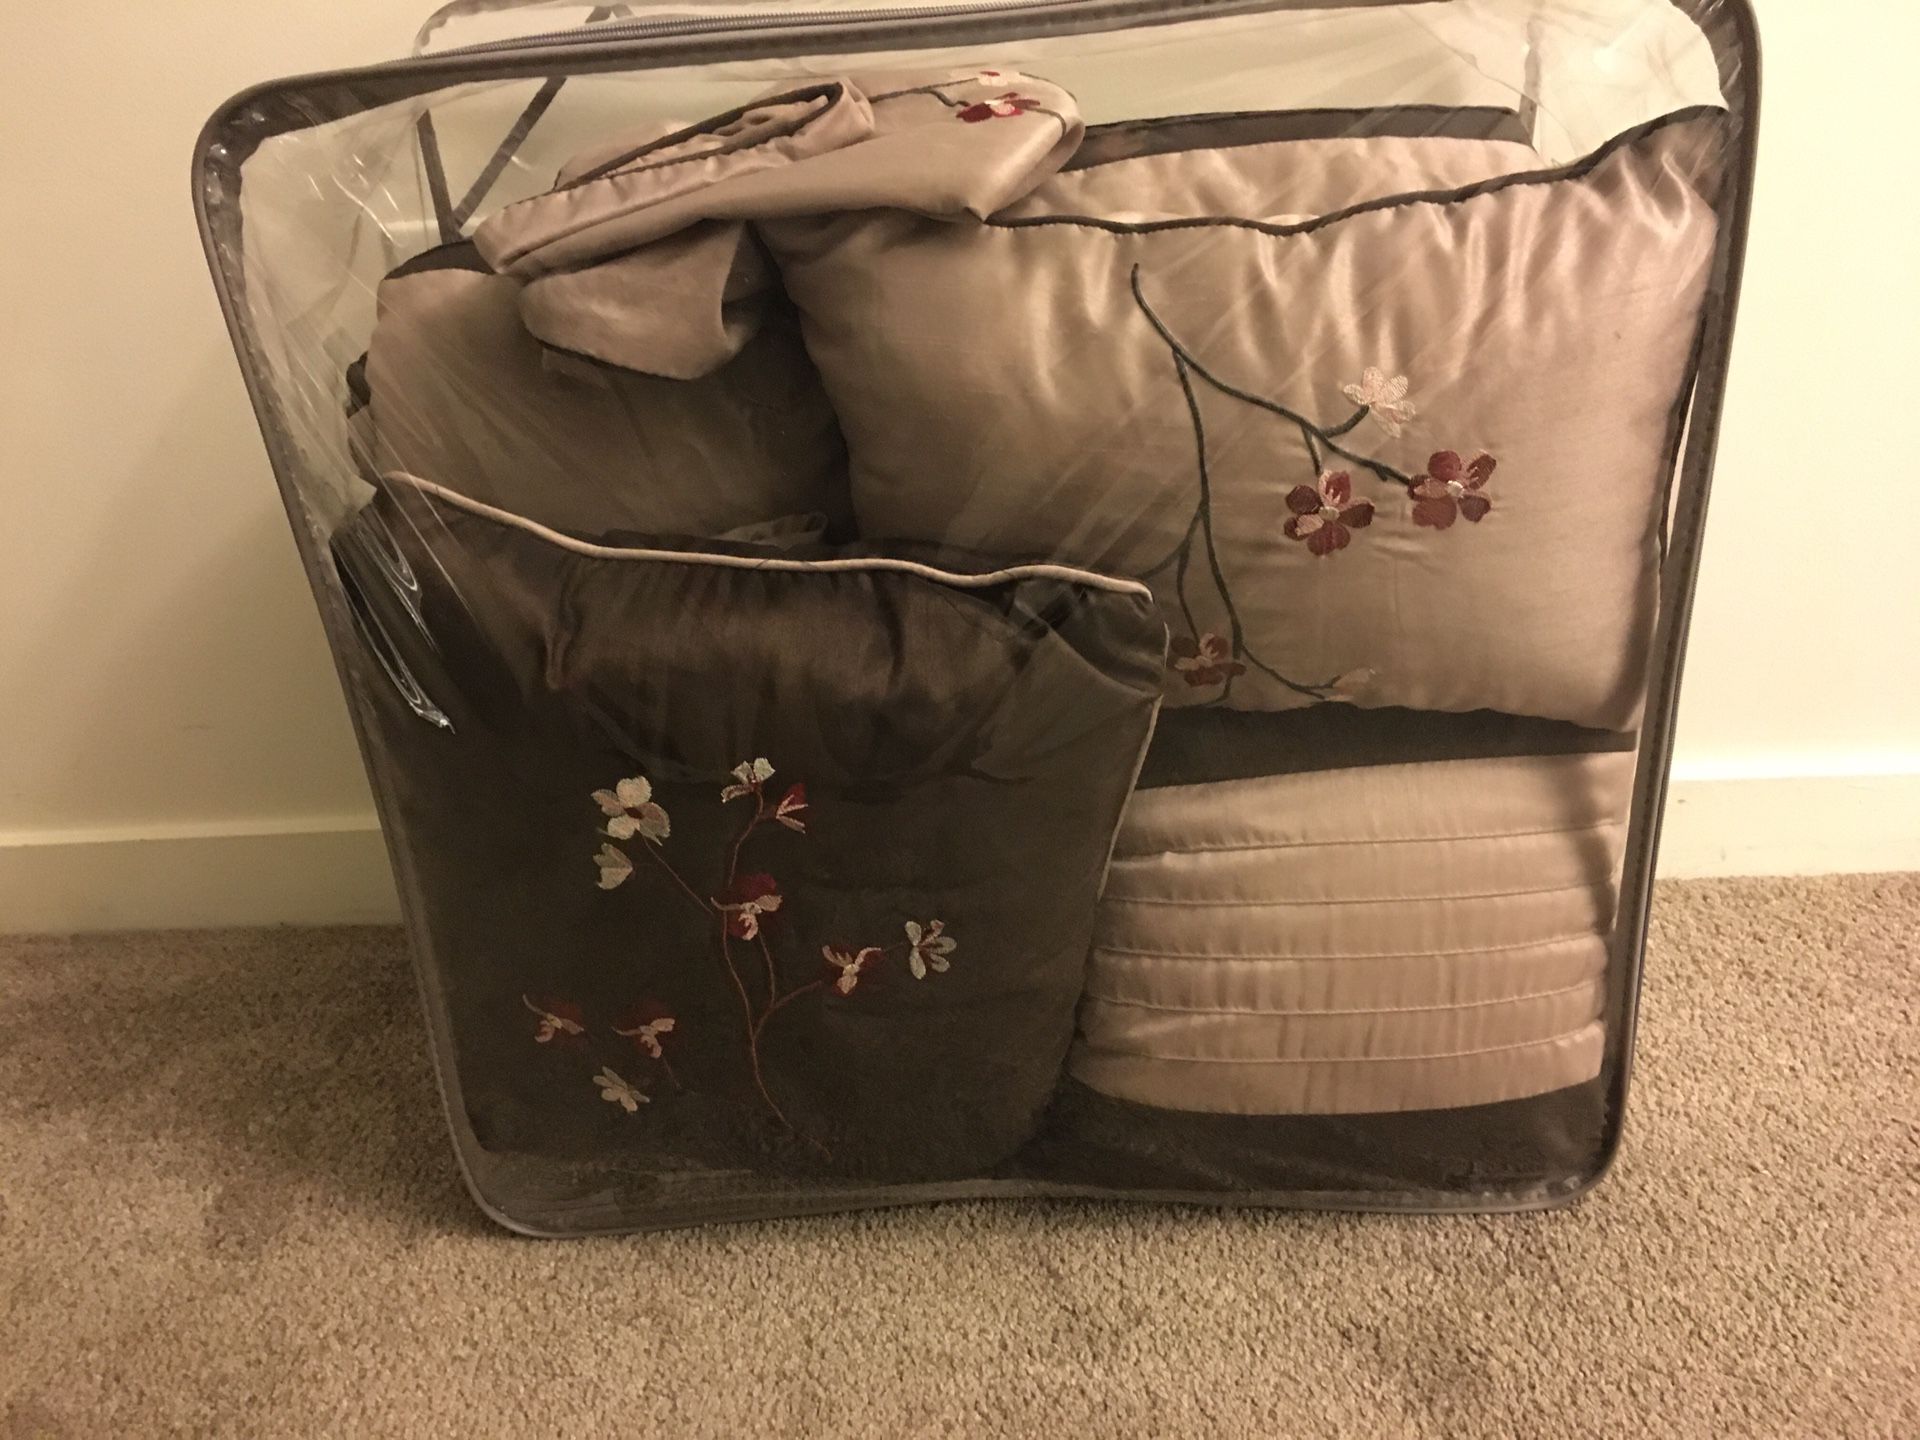 Queen comforter with matching pillows